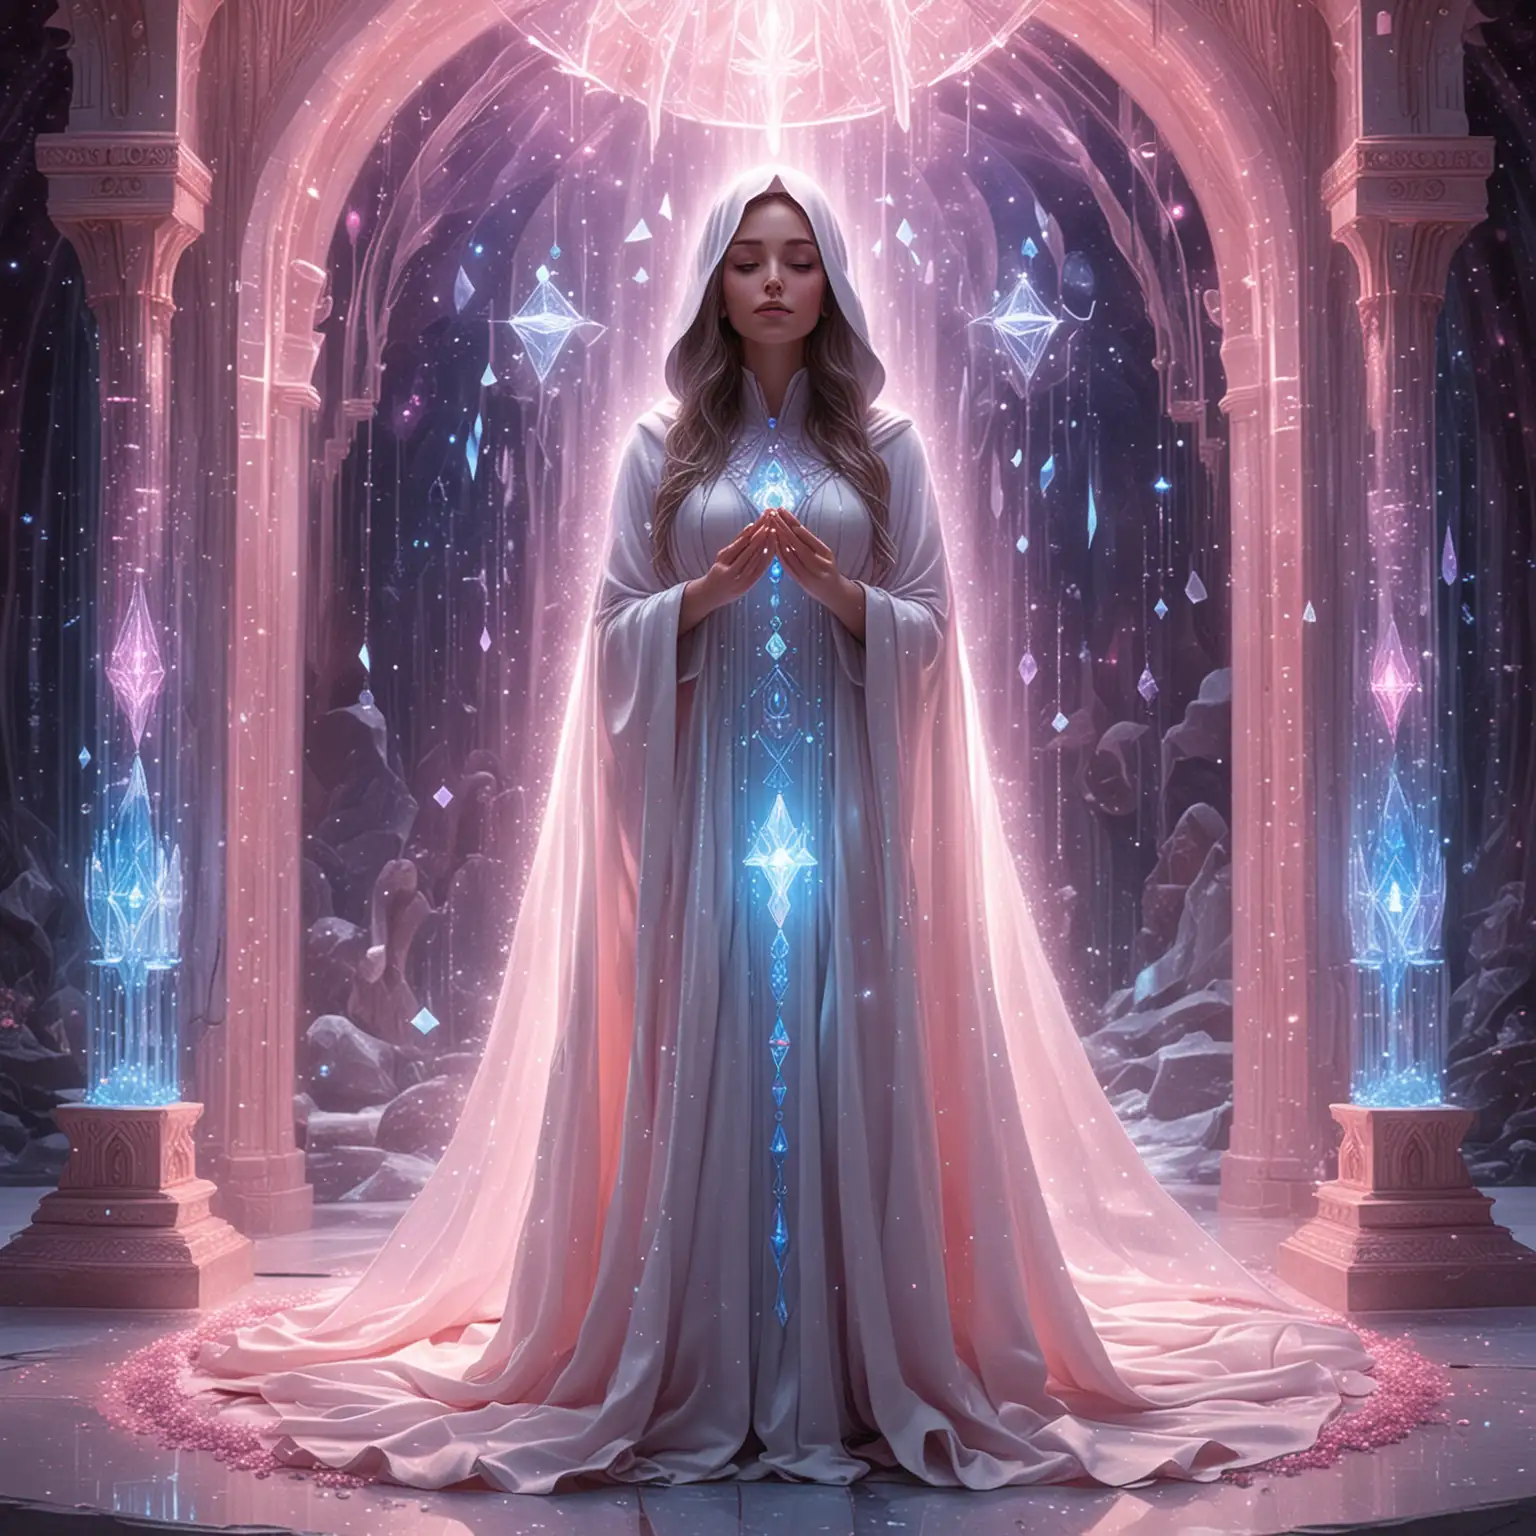 Inside a galactic crystal temple standing on a high crystal platform is a tall and slender beautiful blue pleadian being  dressed in long white, pink and lavender glowing bejeweled iridescent straight cloak with hood, arms by her side, surrounded a lot of bright lights and geometric crystals from a bright symbol above her and a bright light emitting from her hands